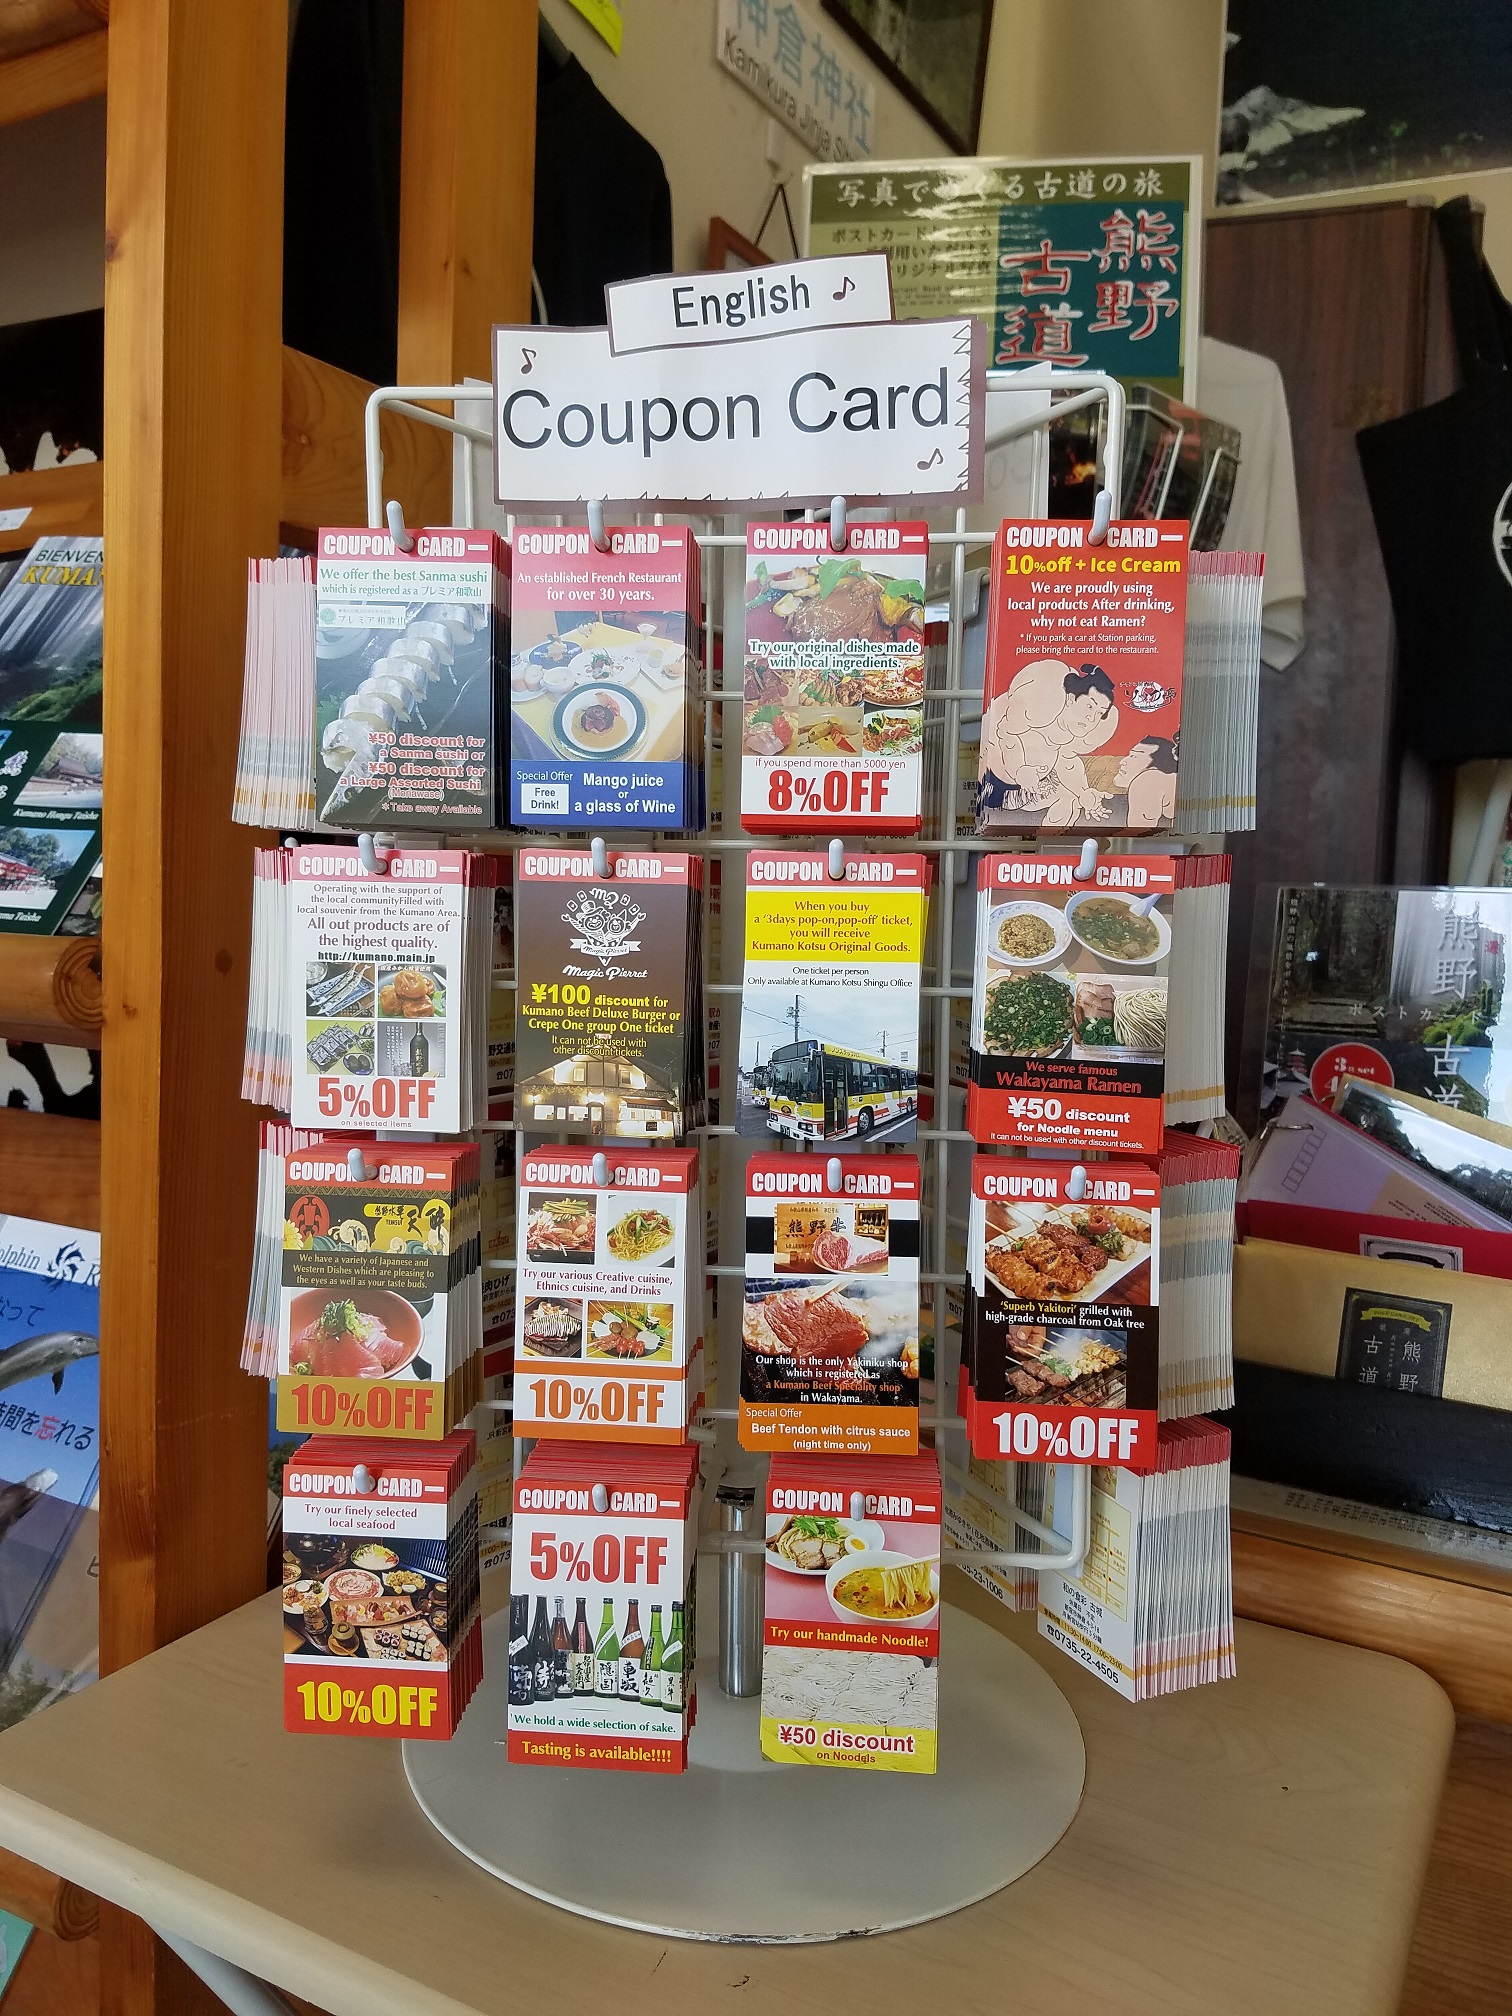 Take a look at our new coupon cards !!!